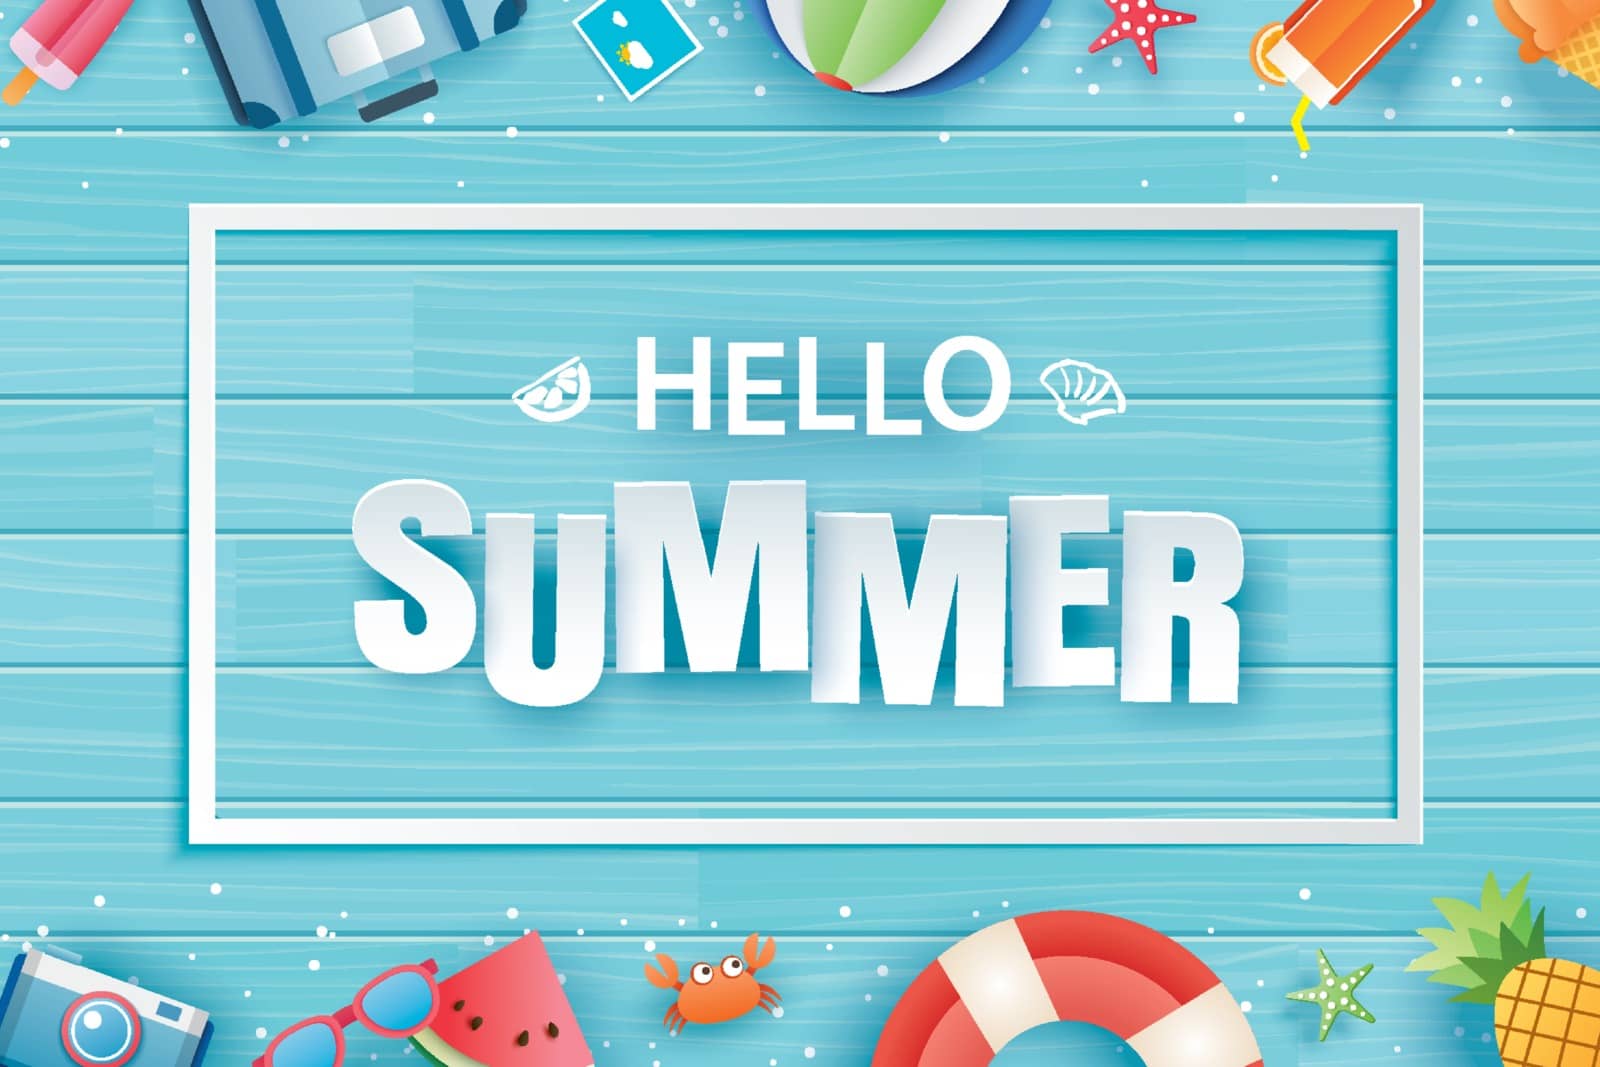 Hello summer with decoration origami on blue wooden background. Paper art and craft style.